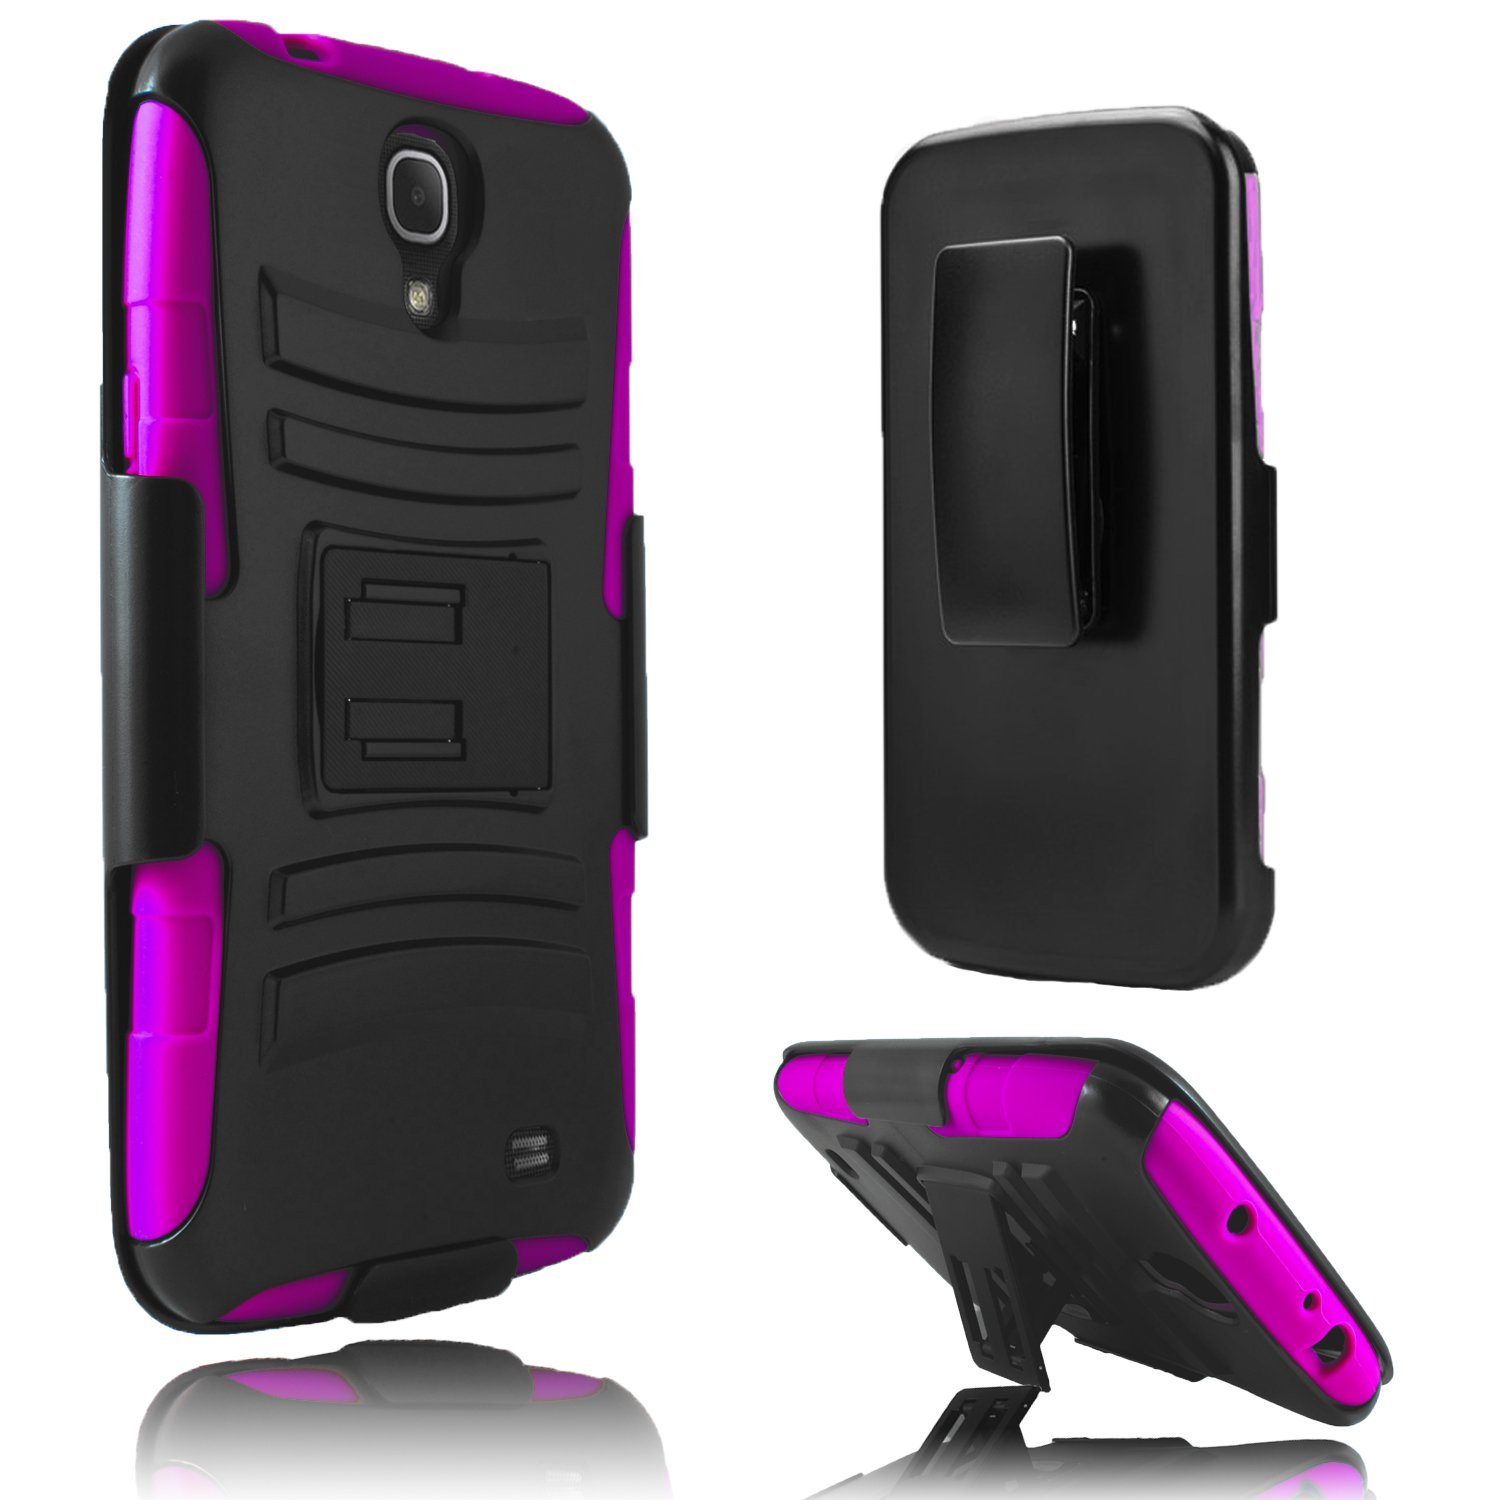 Best Cases for Samsung Galaxy Mega 2-5